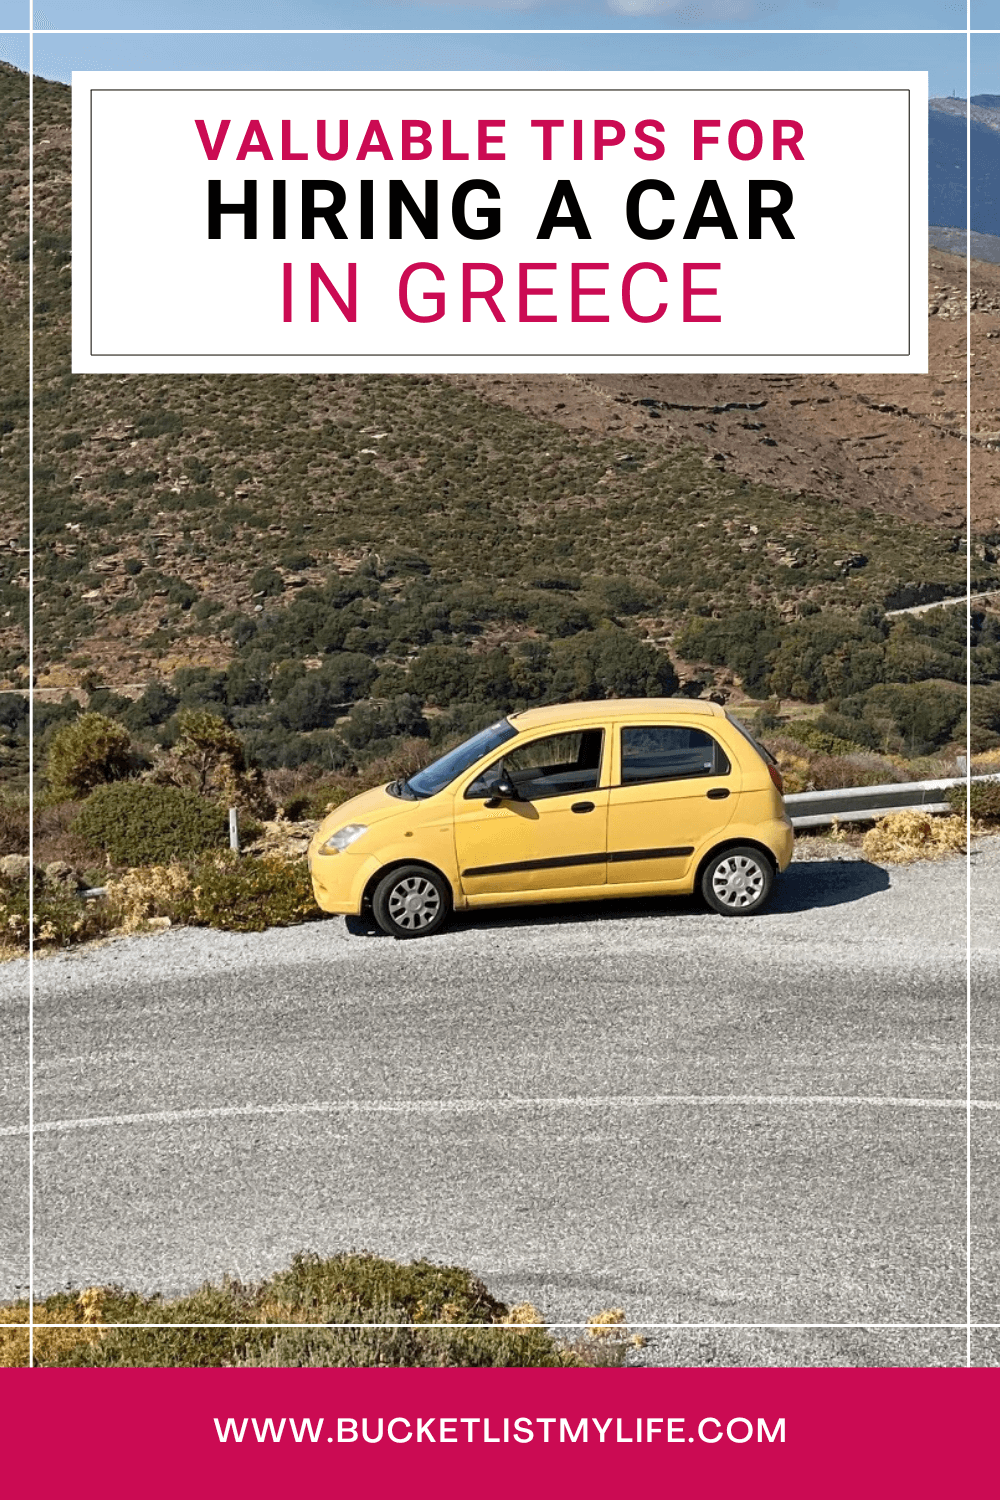 Hiring a Car in Greece: Valuable Tips for a Smooth Rental Experience